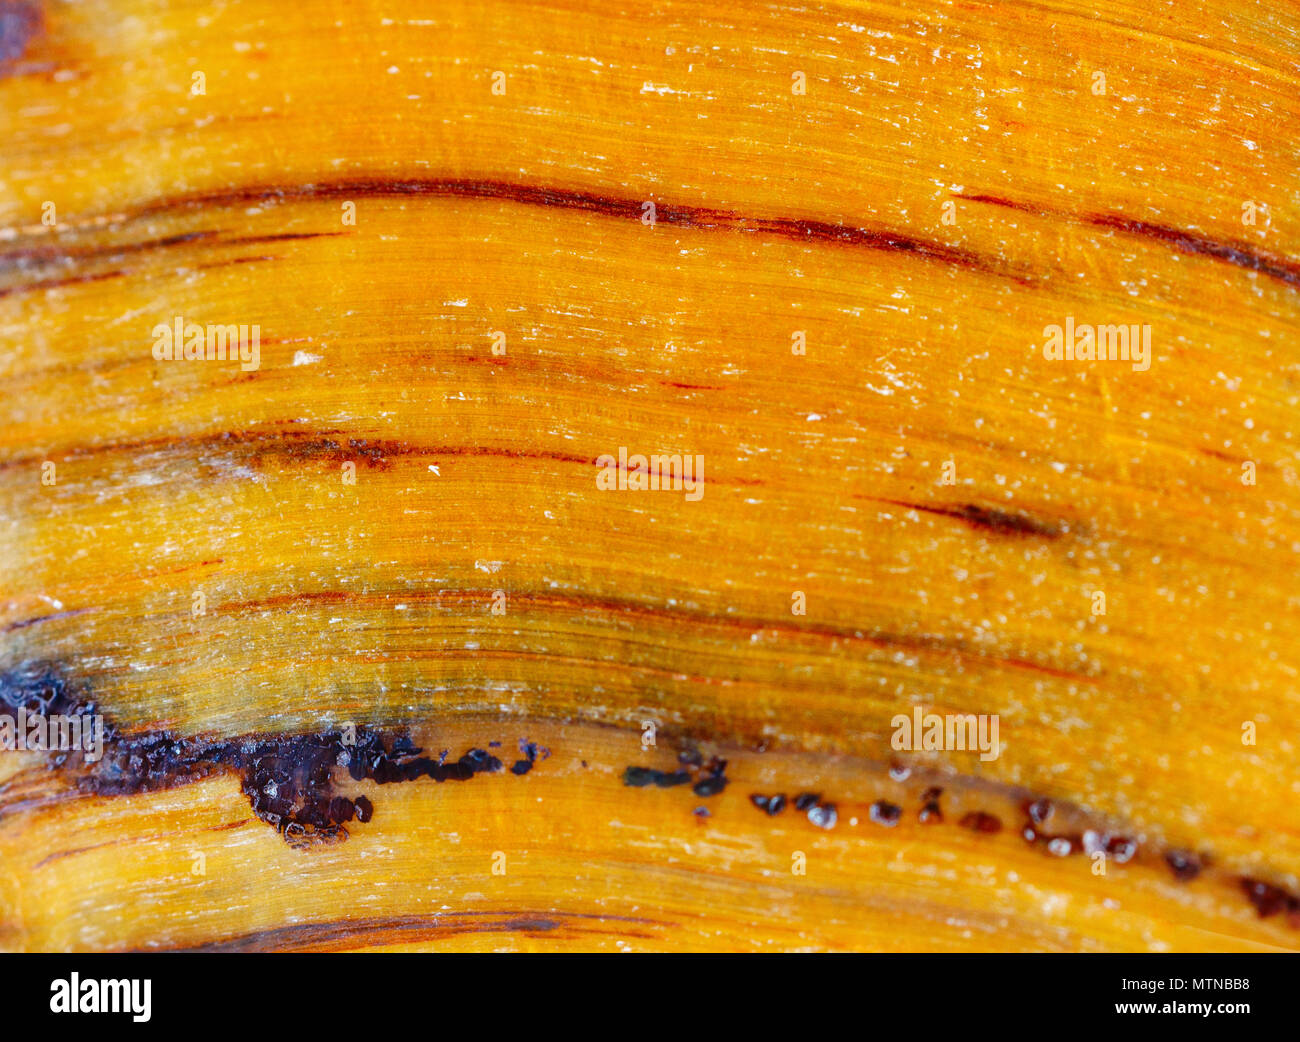 Tigers Eye Stone High Resolution Stock Photography And Images Alamy,Ficus Lyrata Variegata